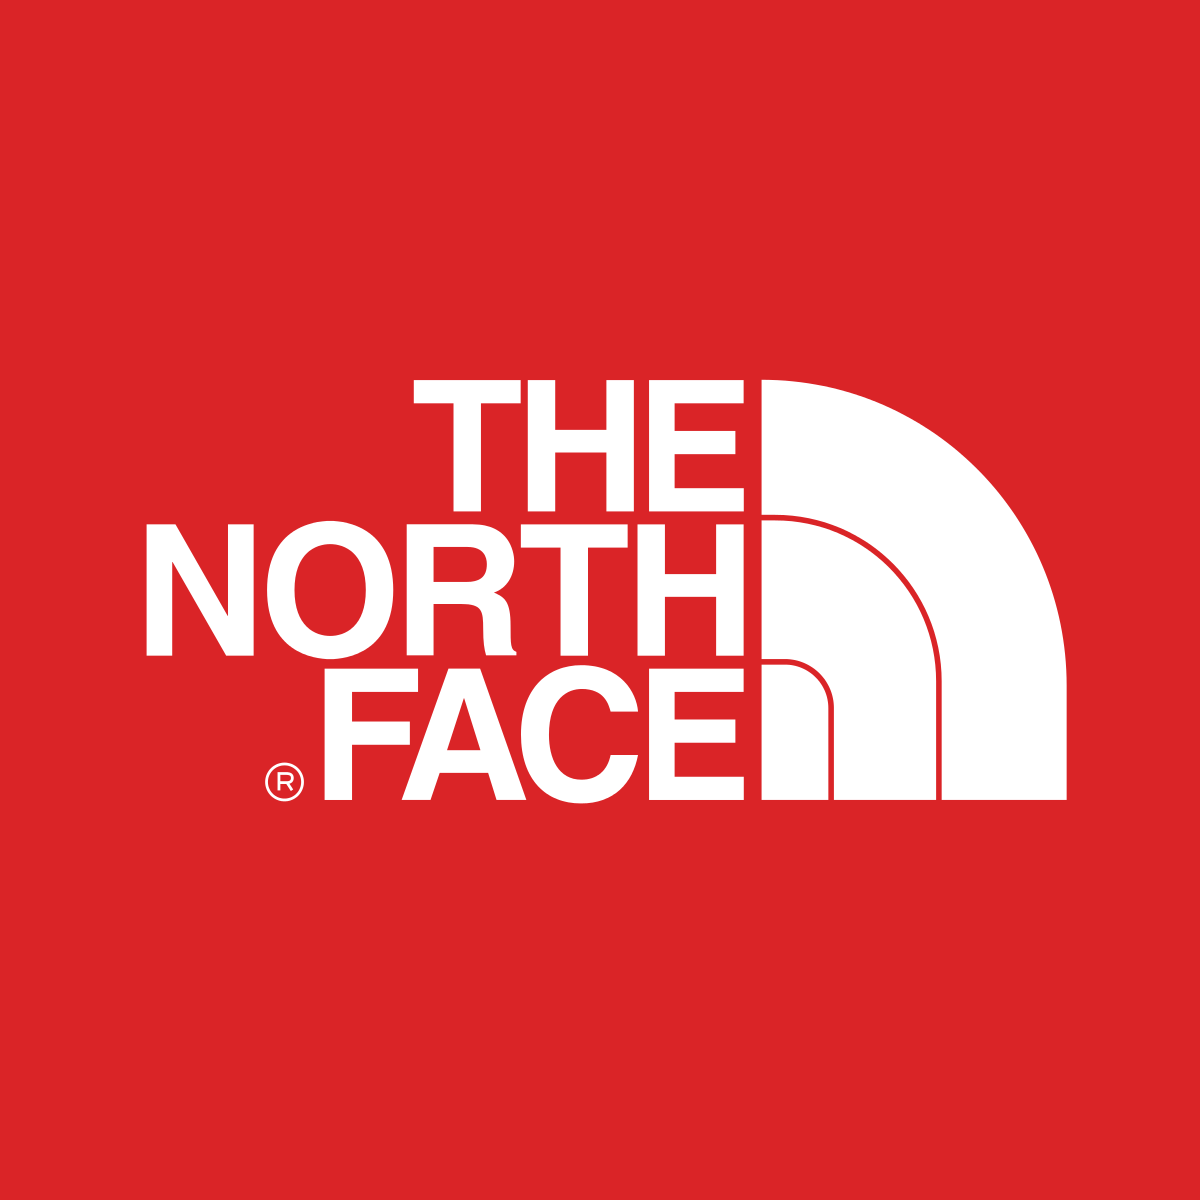 marque THE NORTH FACE